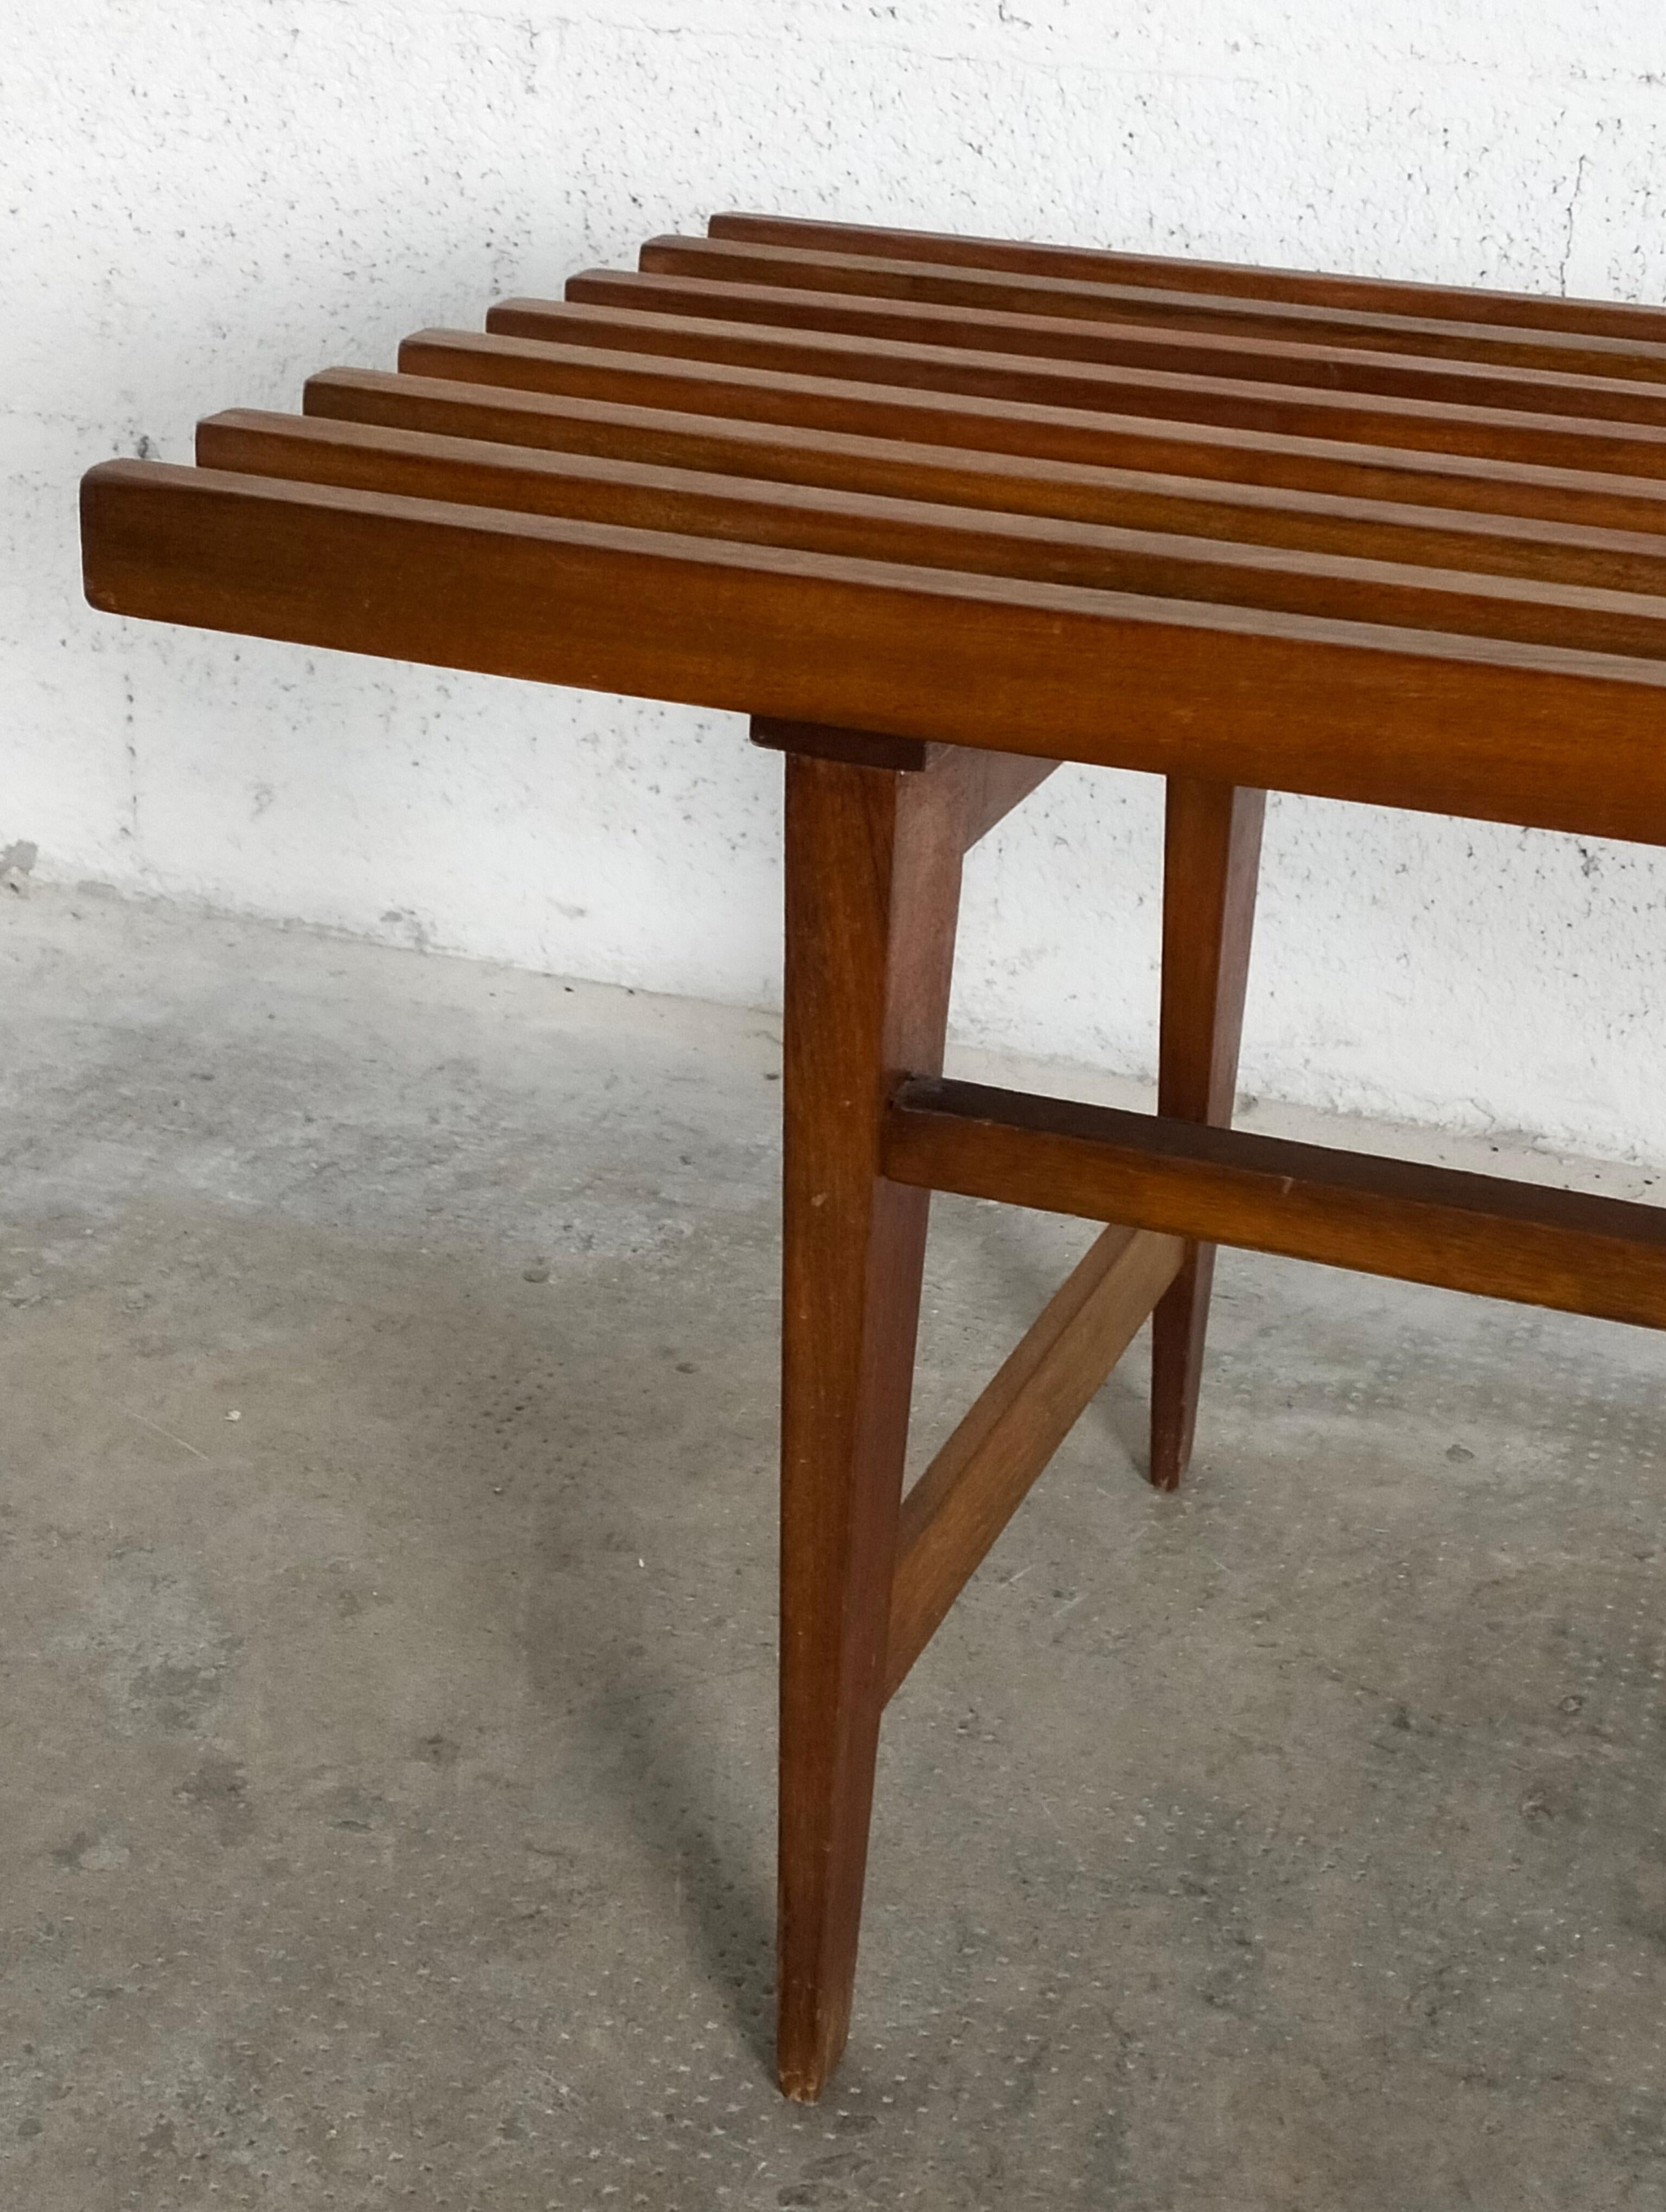 Mid-20th Century Nordic Scandinavian Style Teak Bench from the 1960s For Sale